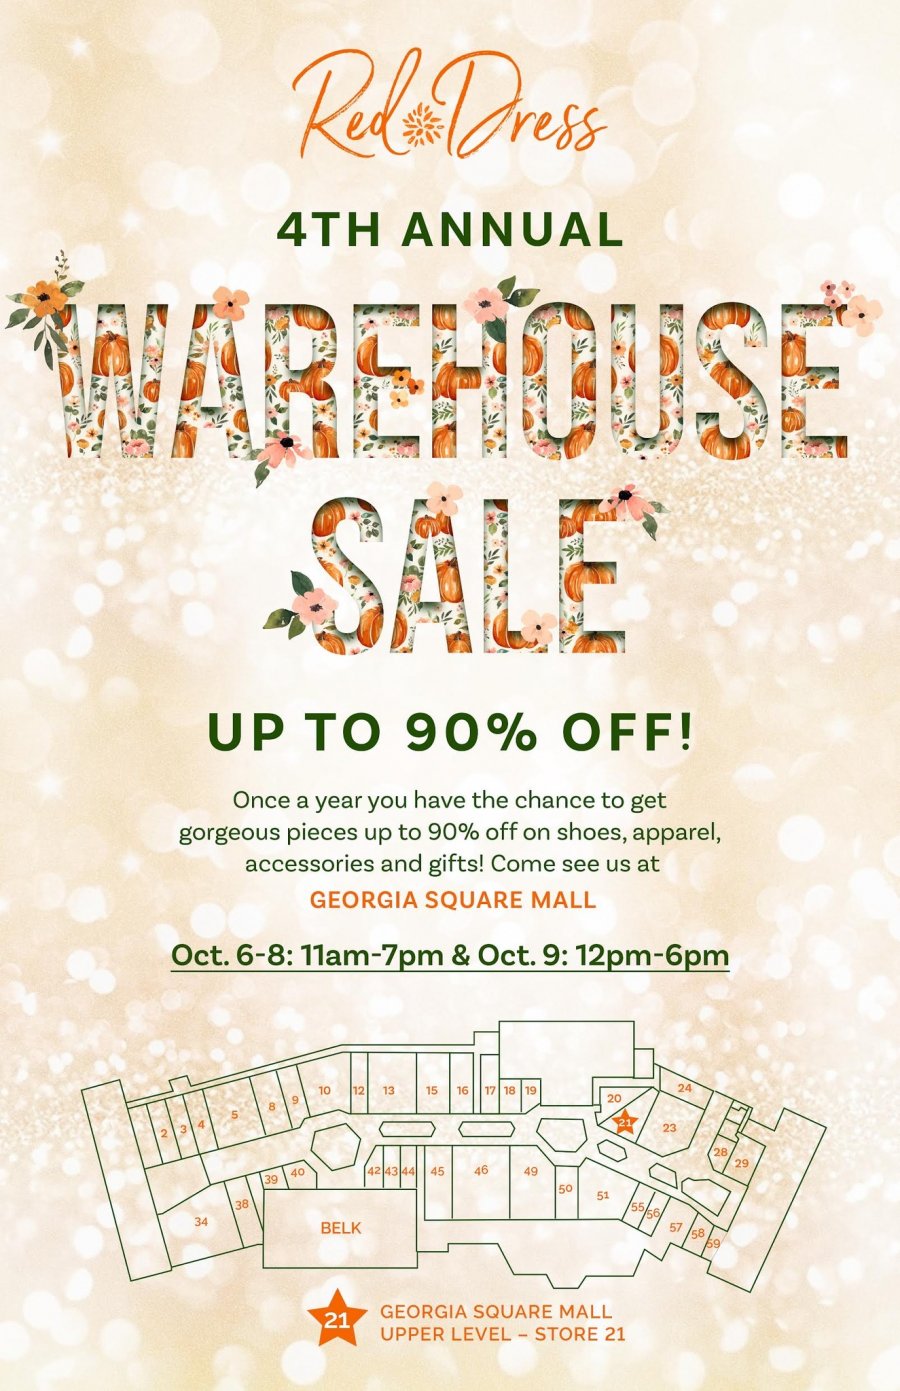 Red Dress 4th Annual Warehouse Sale